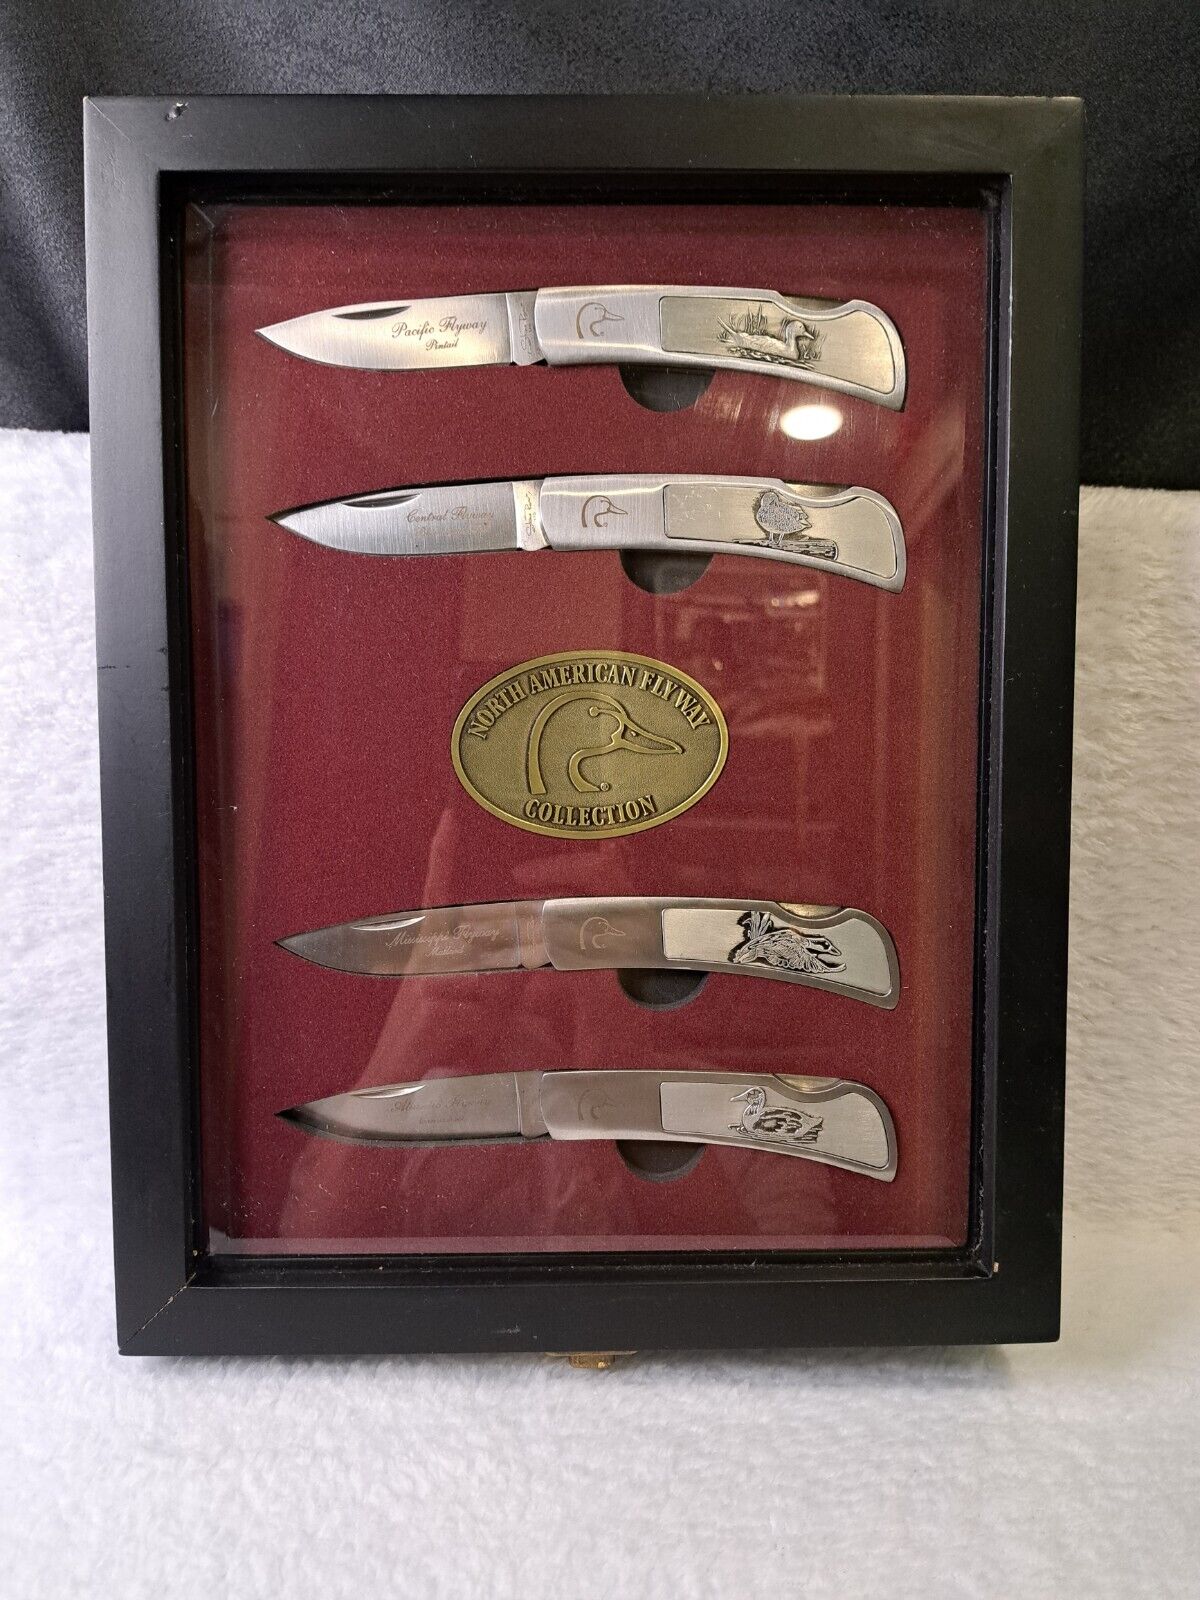 North American Flyway Ducks Unlimited Four Folding Knives With Display Case